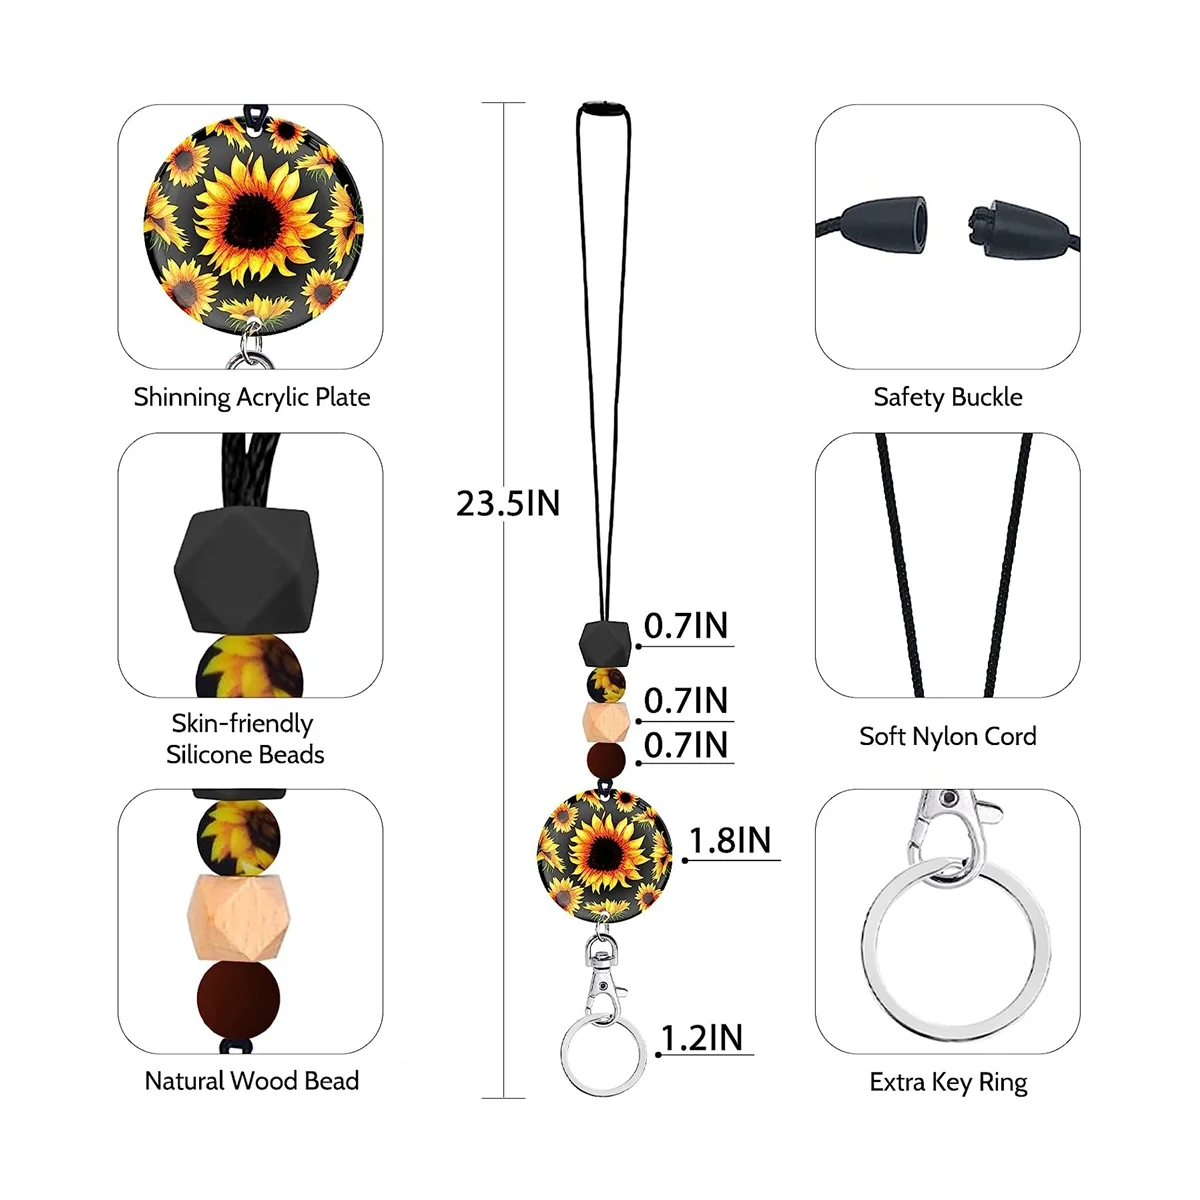 

Sunflower Lanyards for Id Badges and Keys, Cute ID Badge Holder with Lanyard, for Women Teacher Nurse